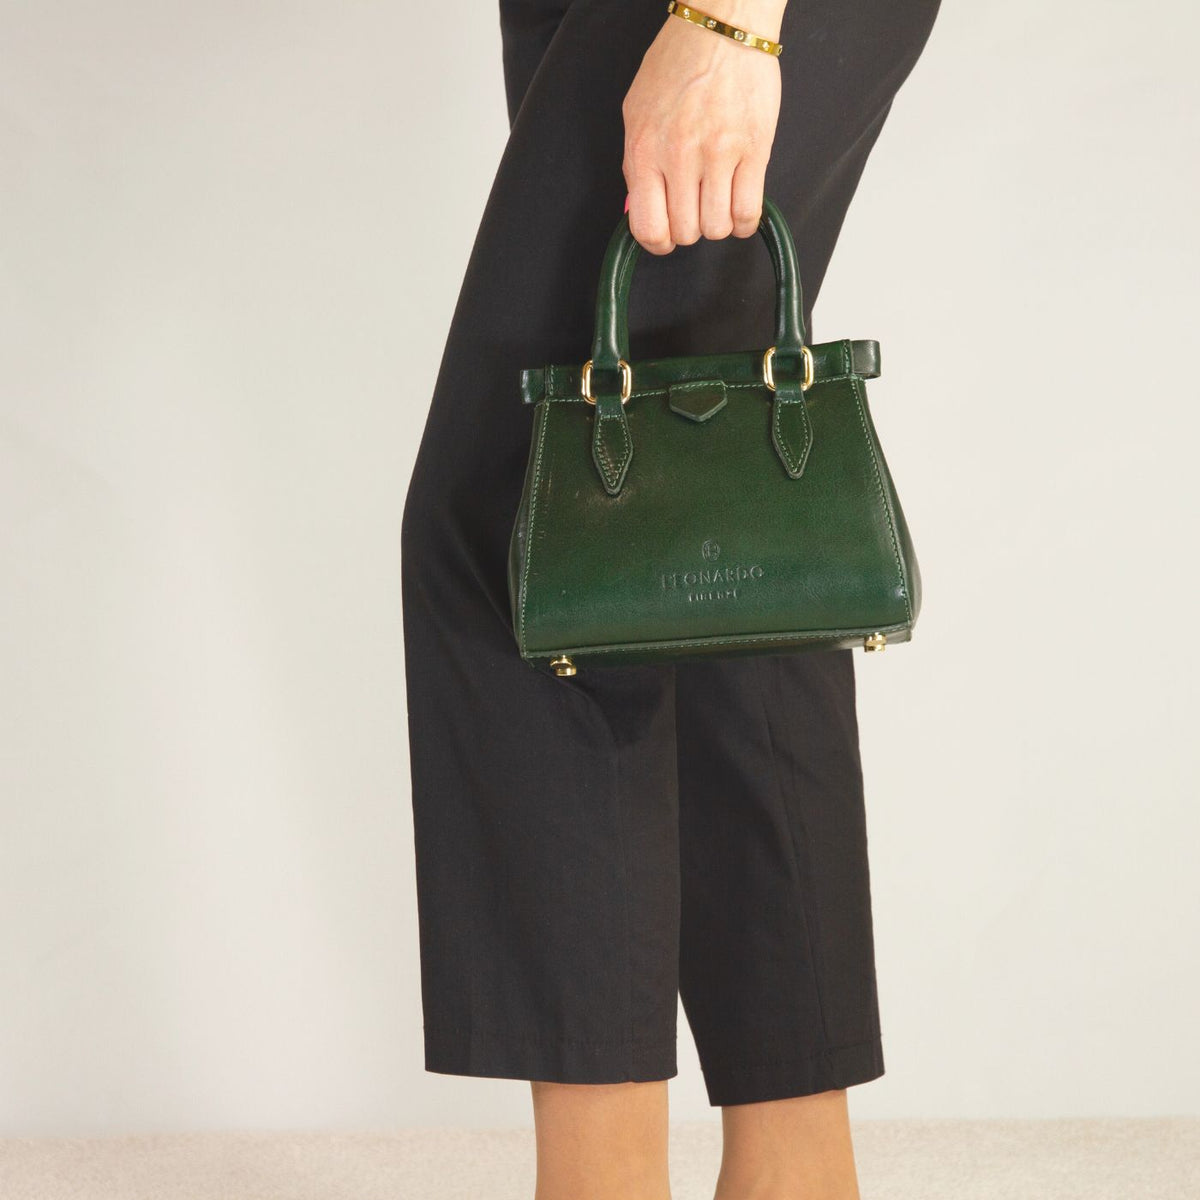 Fiorenza leather handbag with removable green shoulder strap